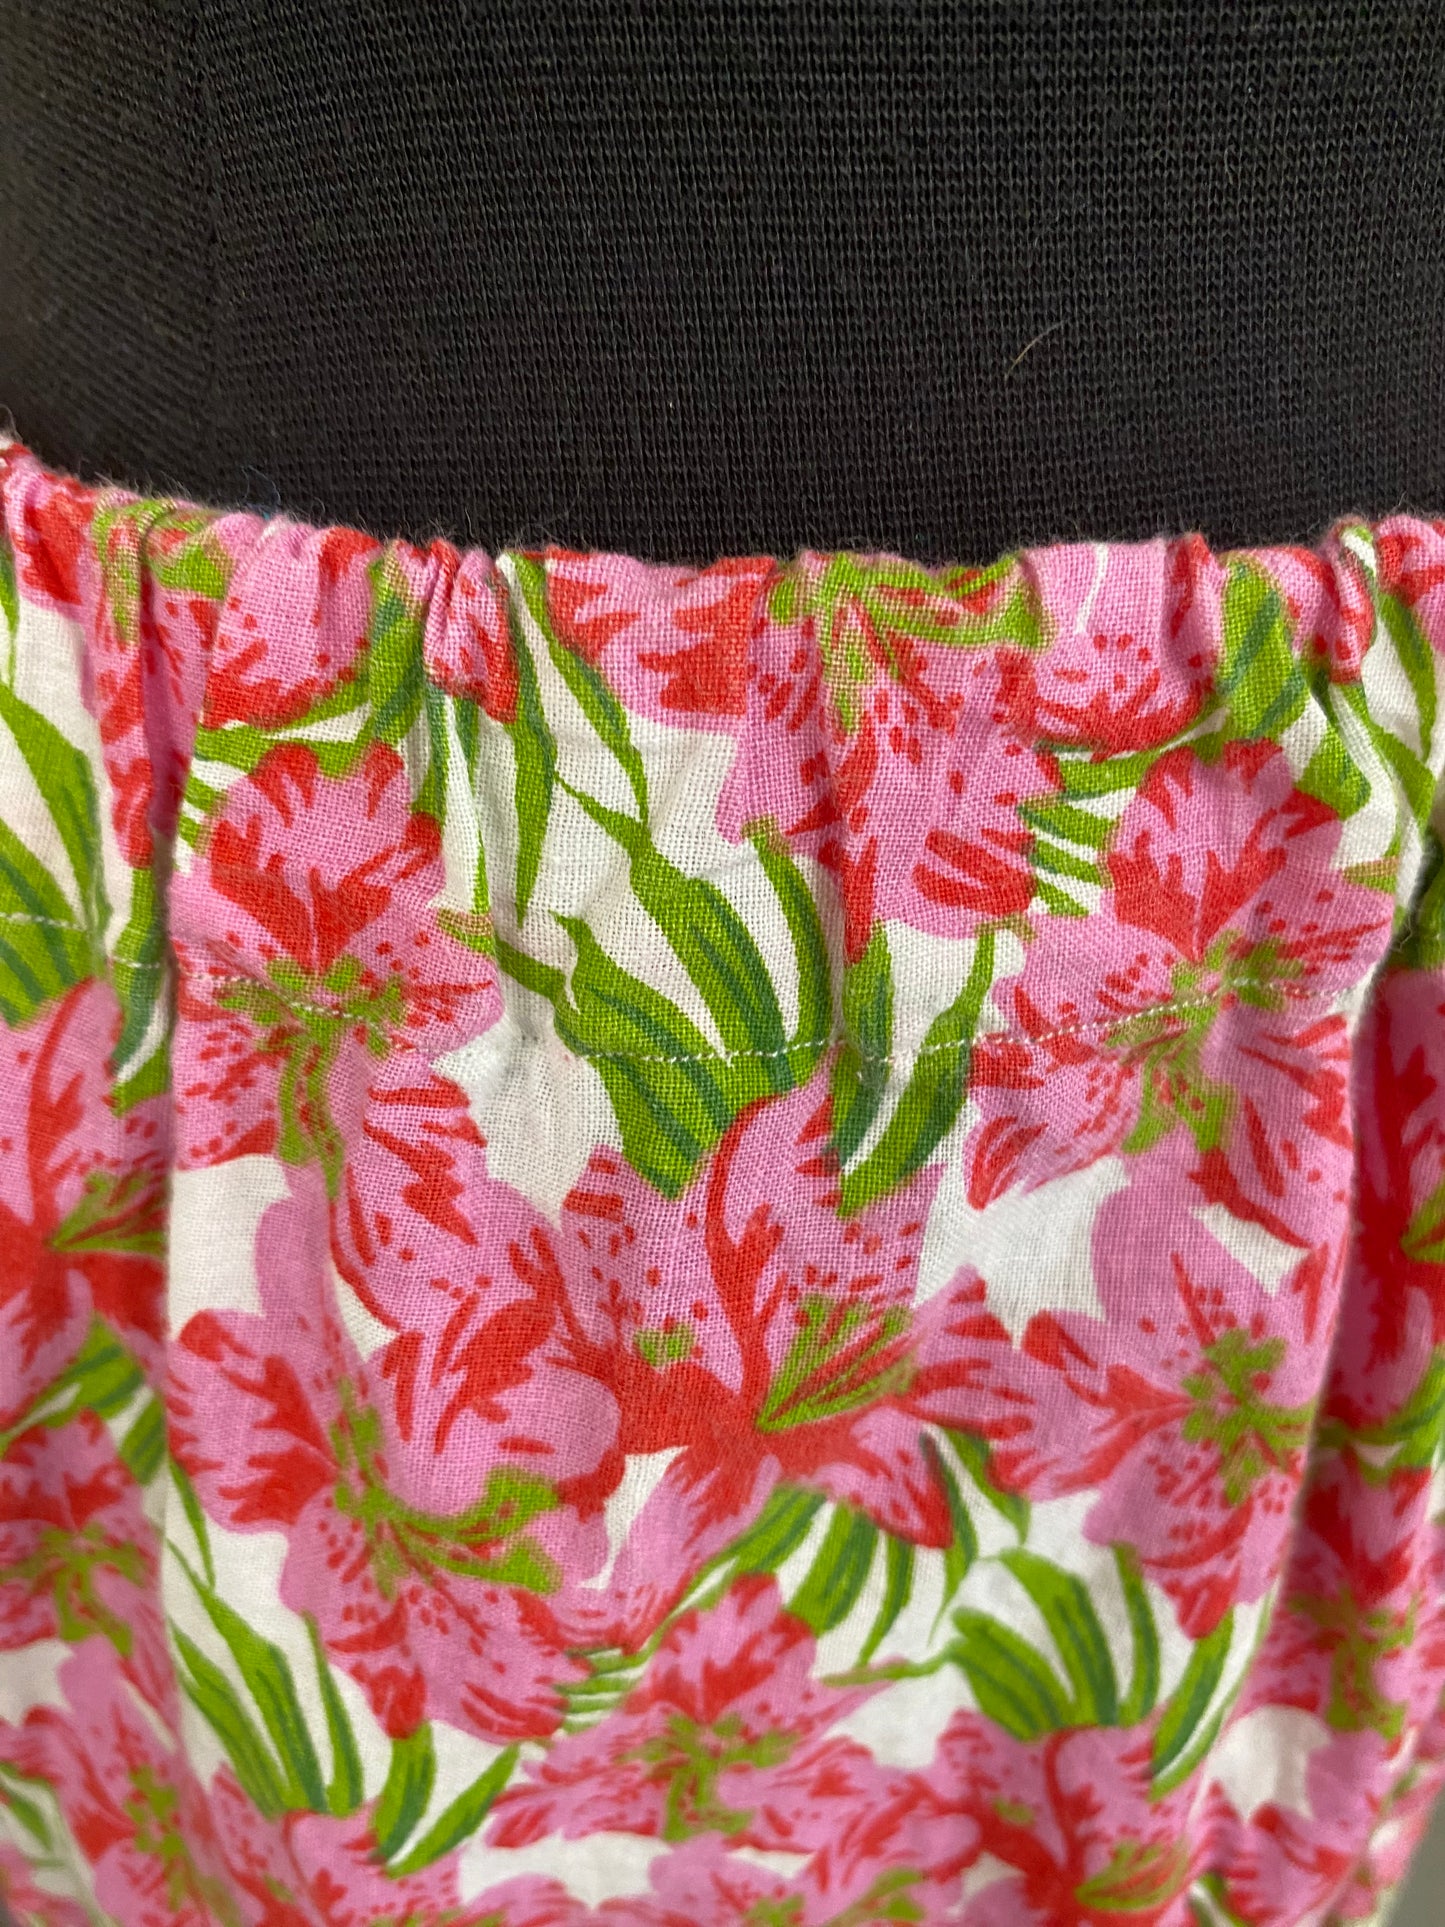 Hand Made  White with Pink and Green Lily patterned Skirt Size 12